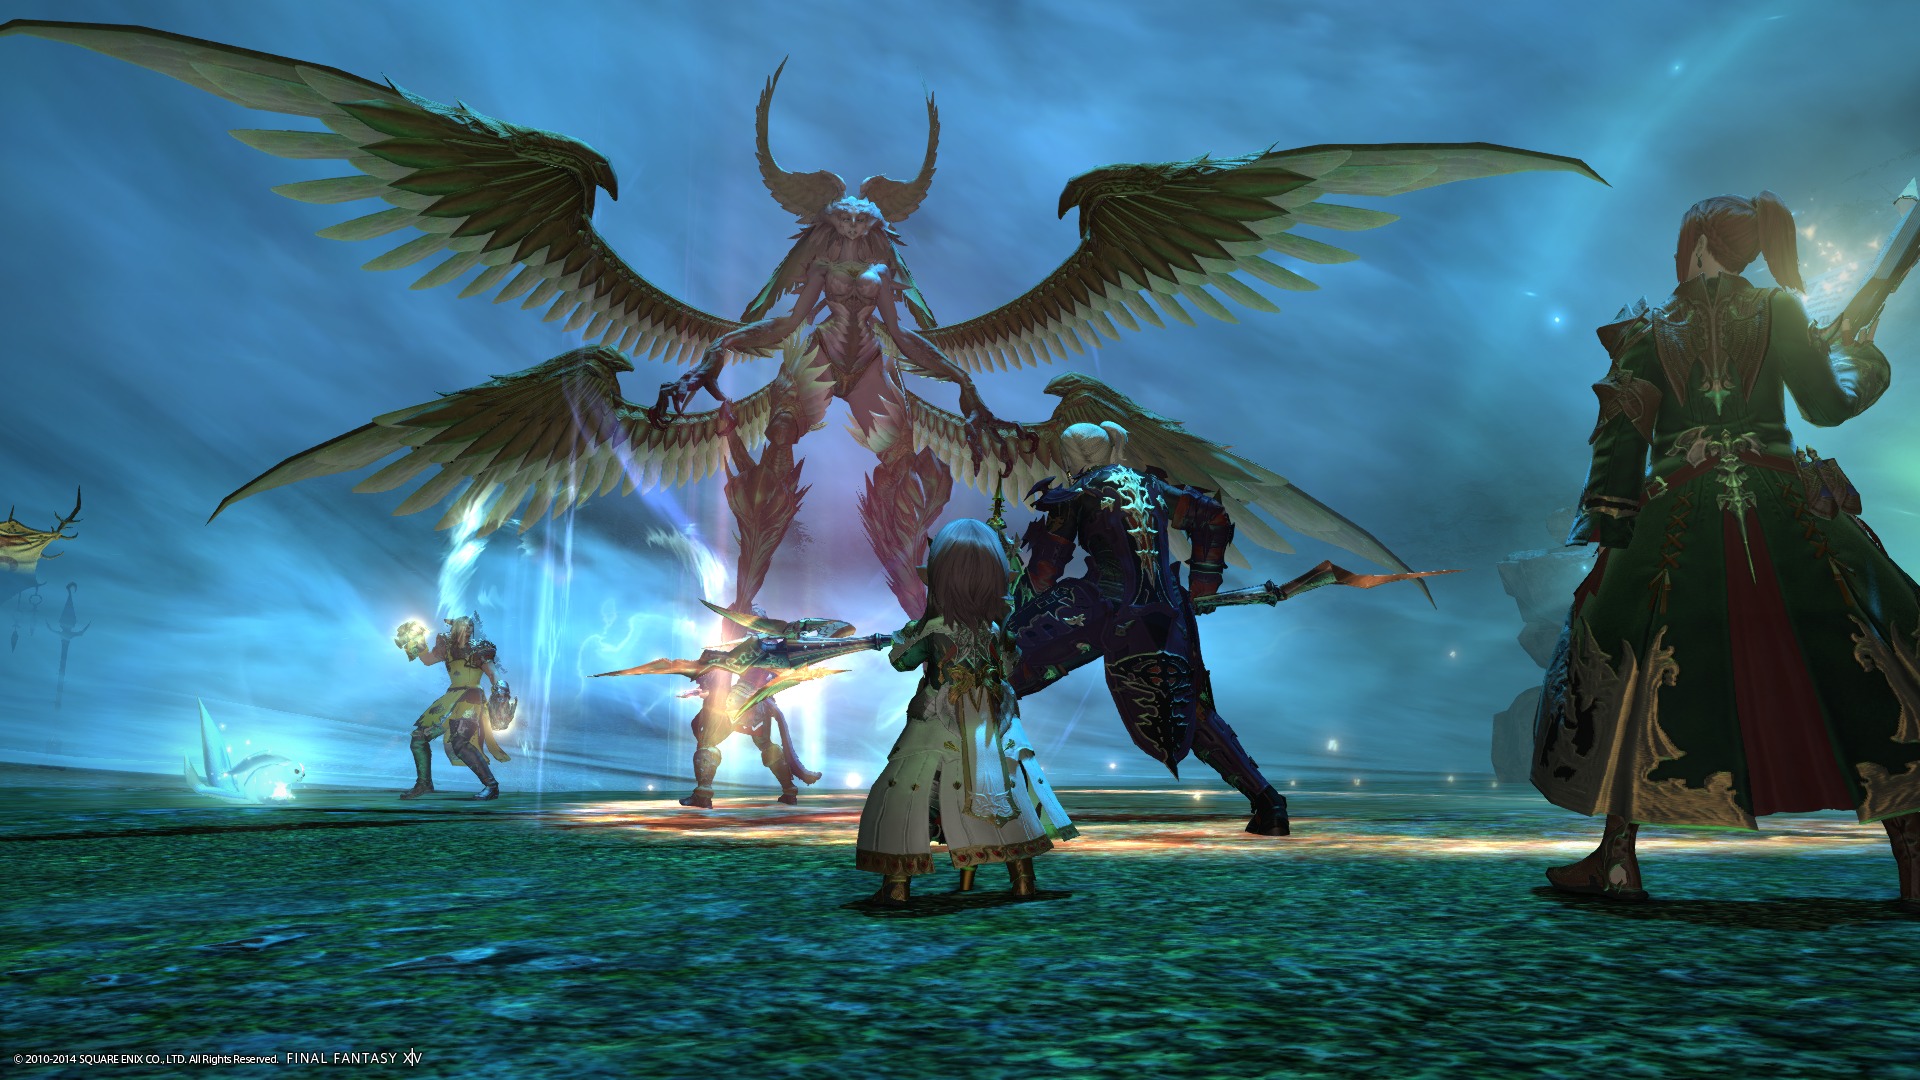 Final Fantasy XIV A Realm Reborn on PS4 Delivers Full HD Experience